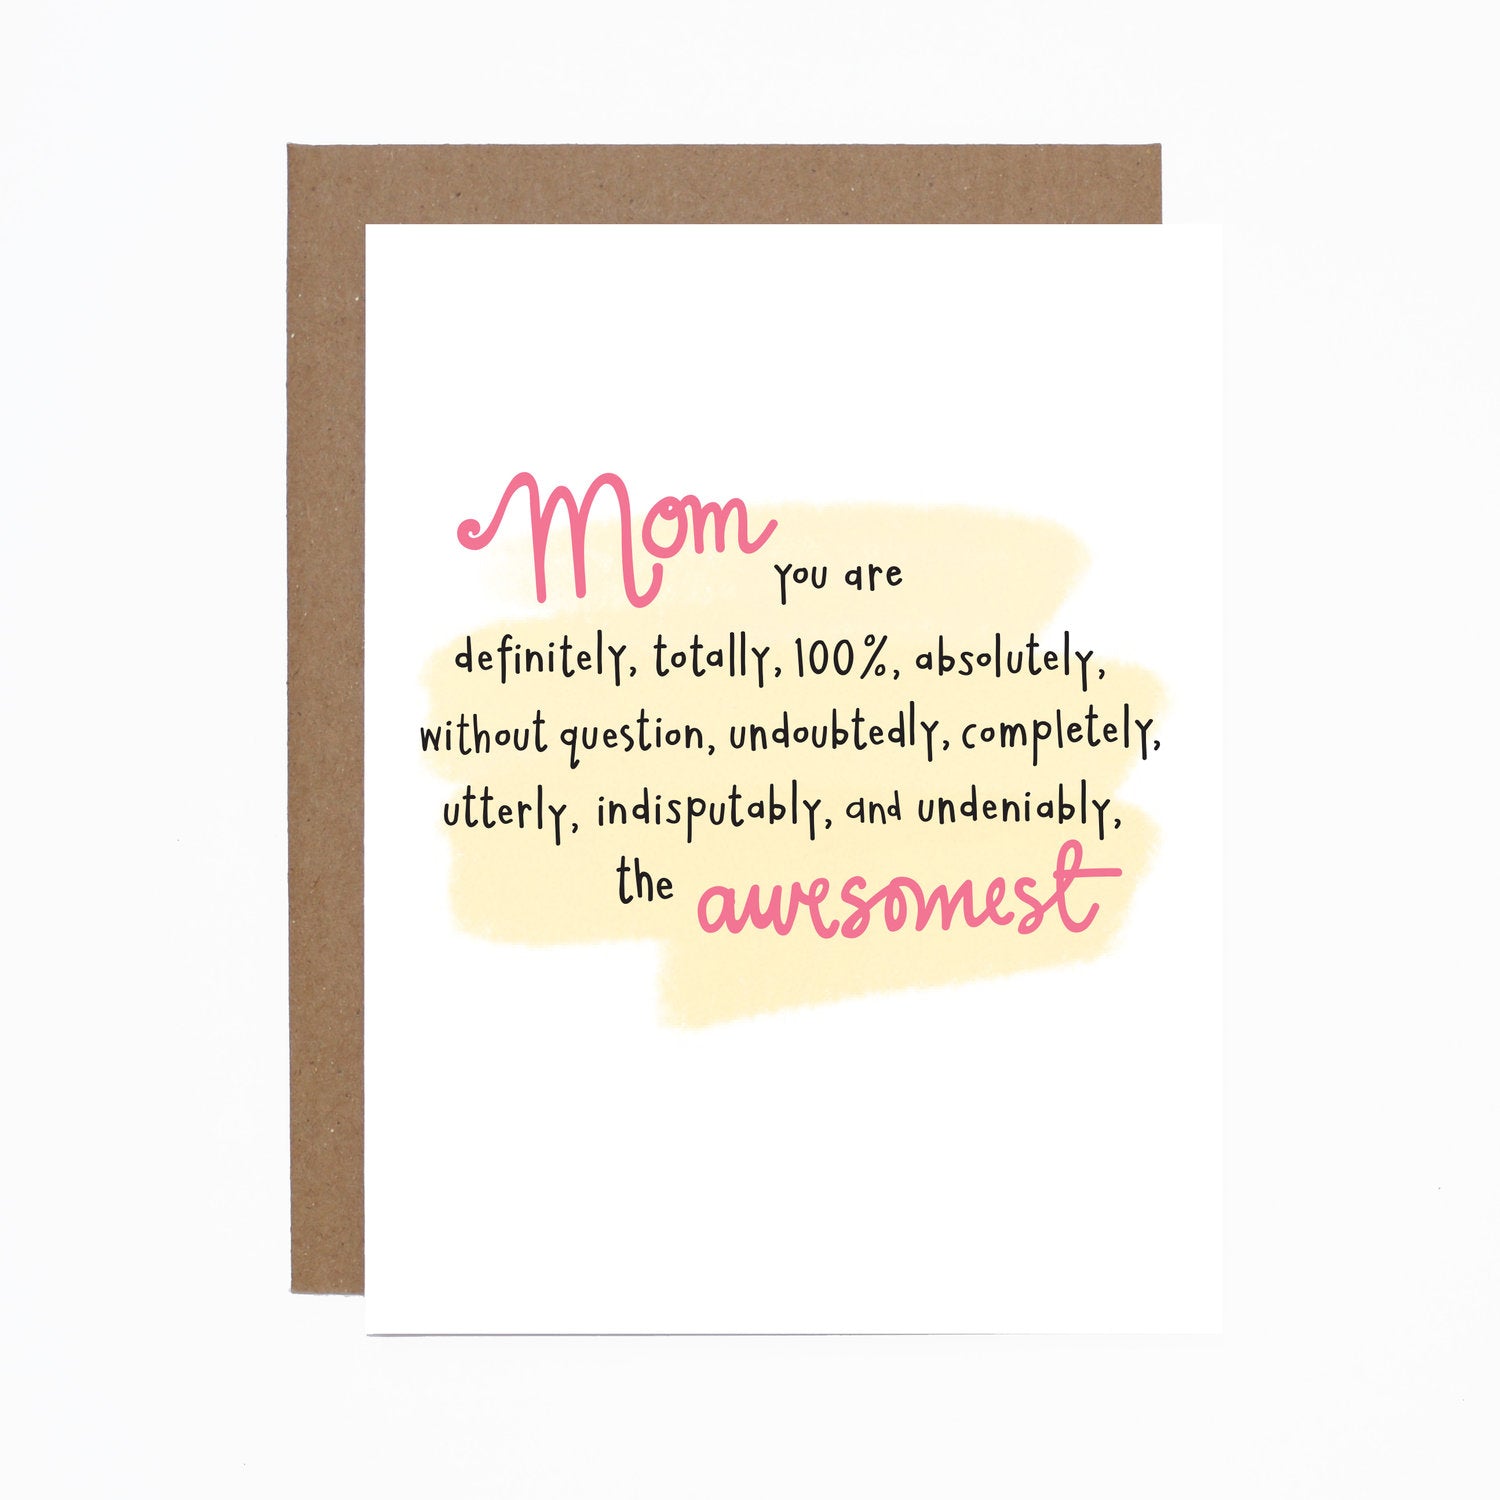 Mother's Day (awesomest) card